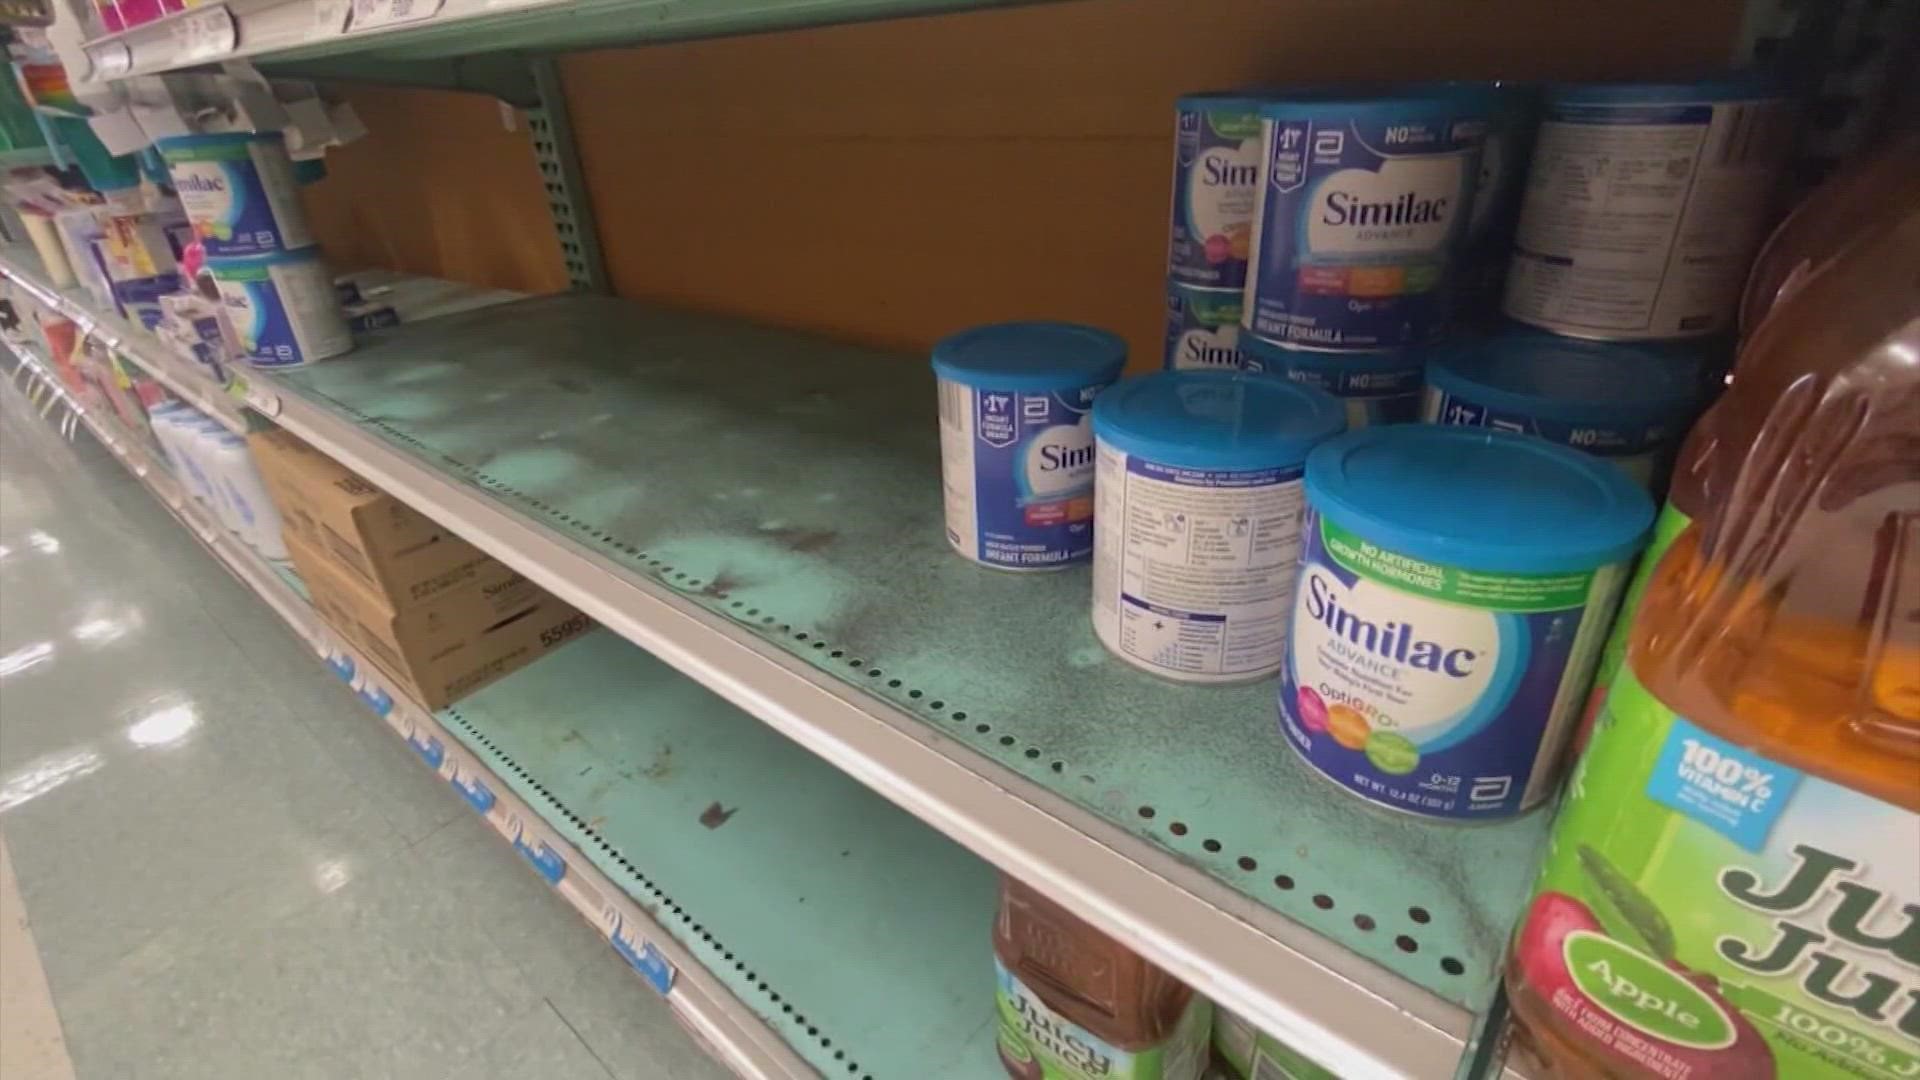 It turns out there are only a handful of manufacturers of baby formula in the whole country. So when the biggest one has issues, it's going to have a ripple effect.